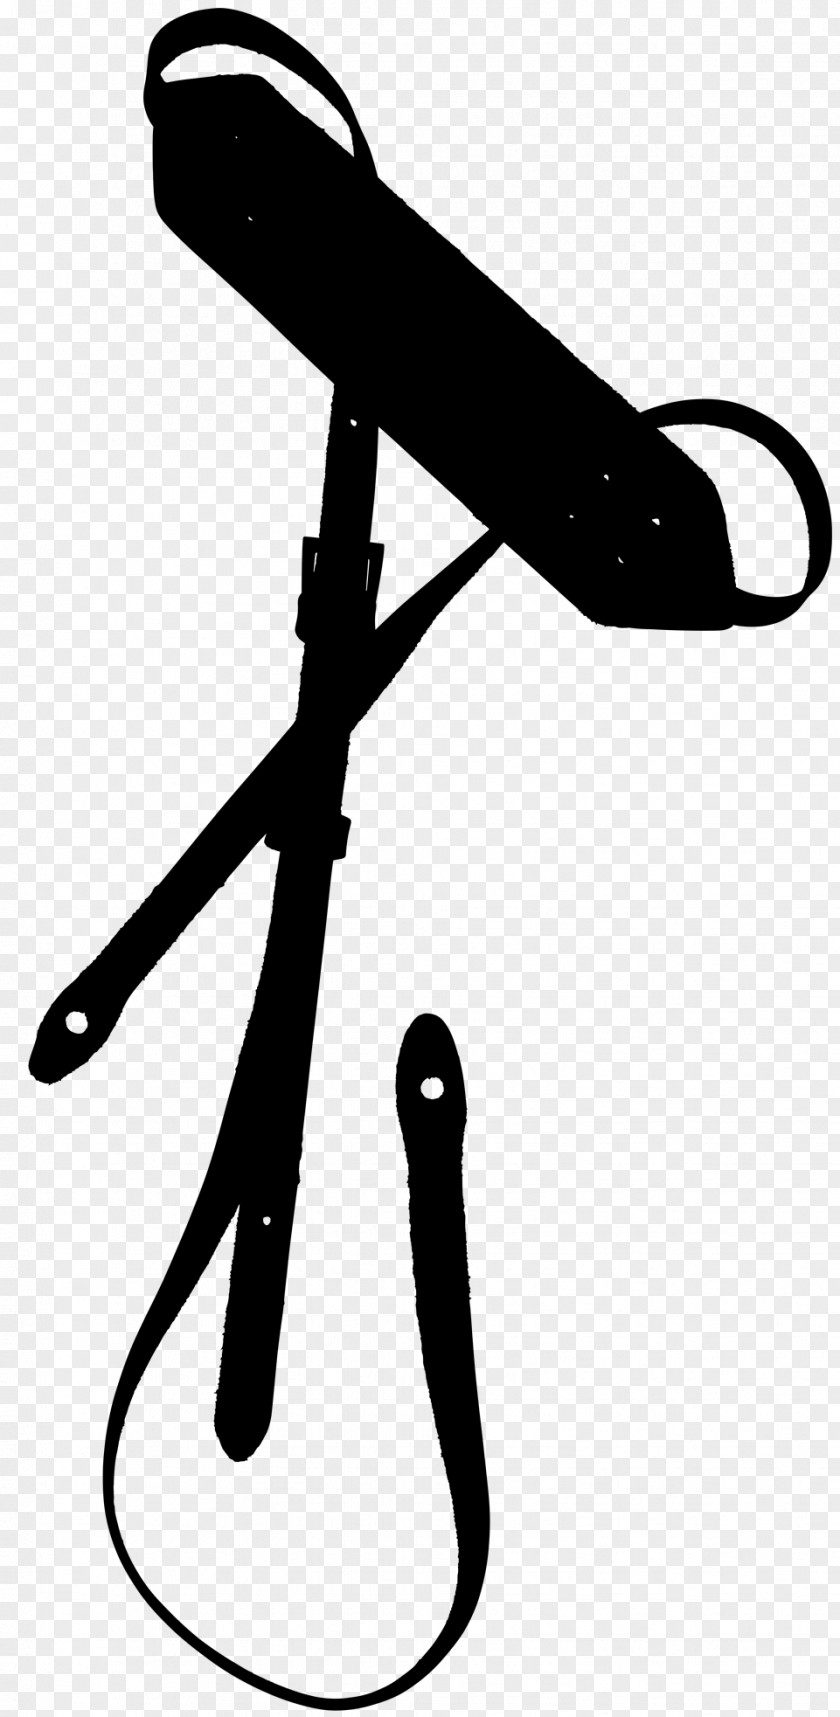 Musical Instrument Accessory Clothing Accessories Clip Art Product Design Angle PNG